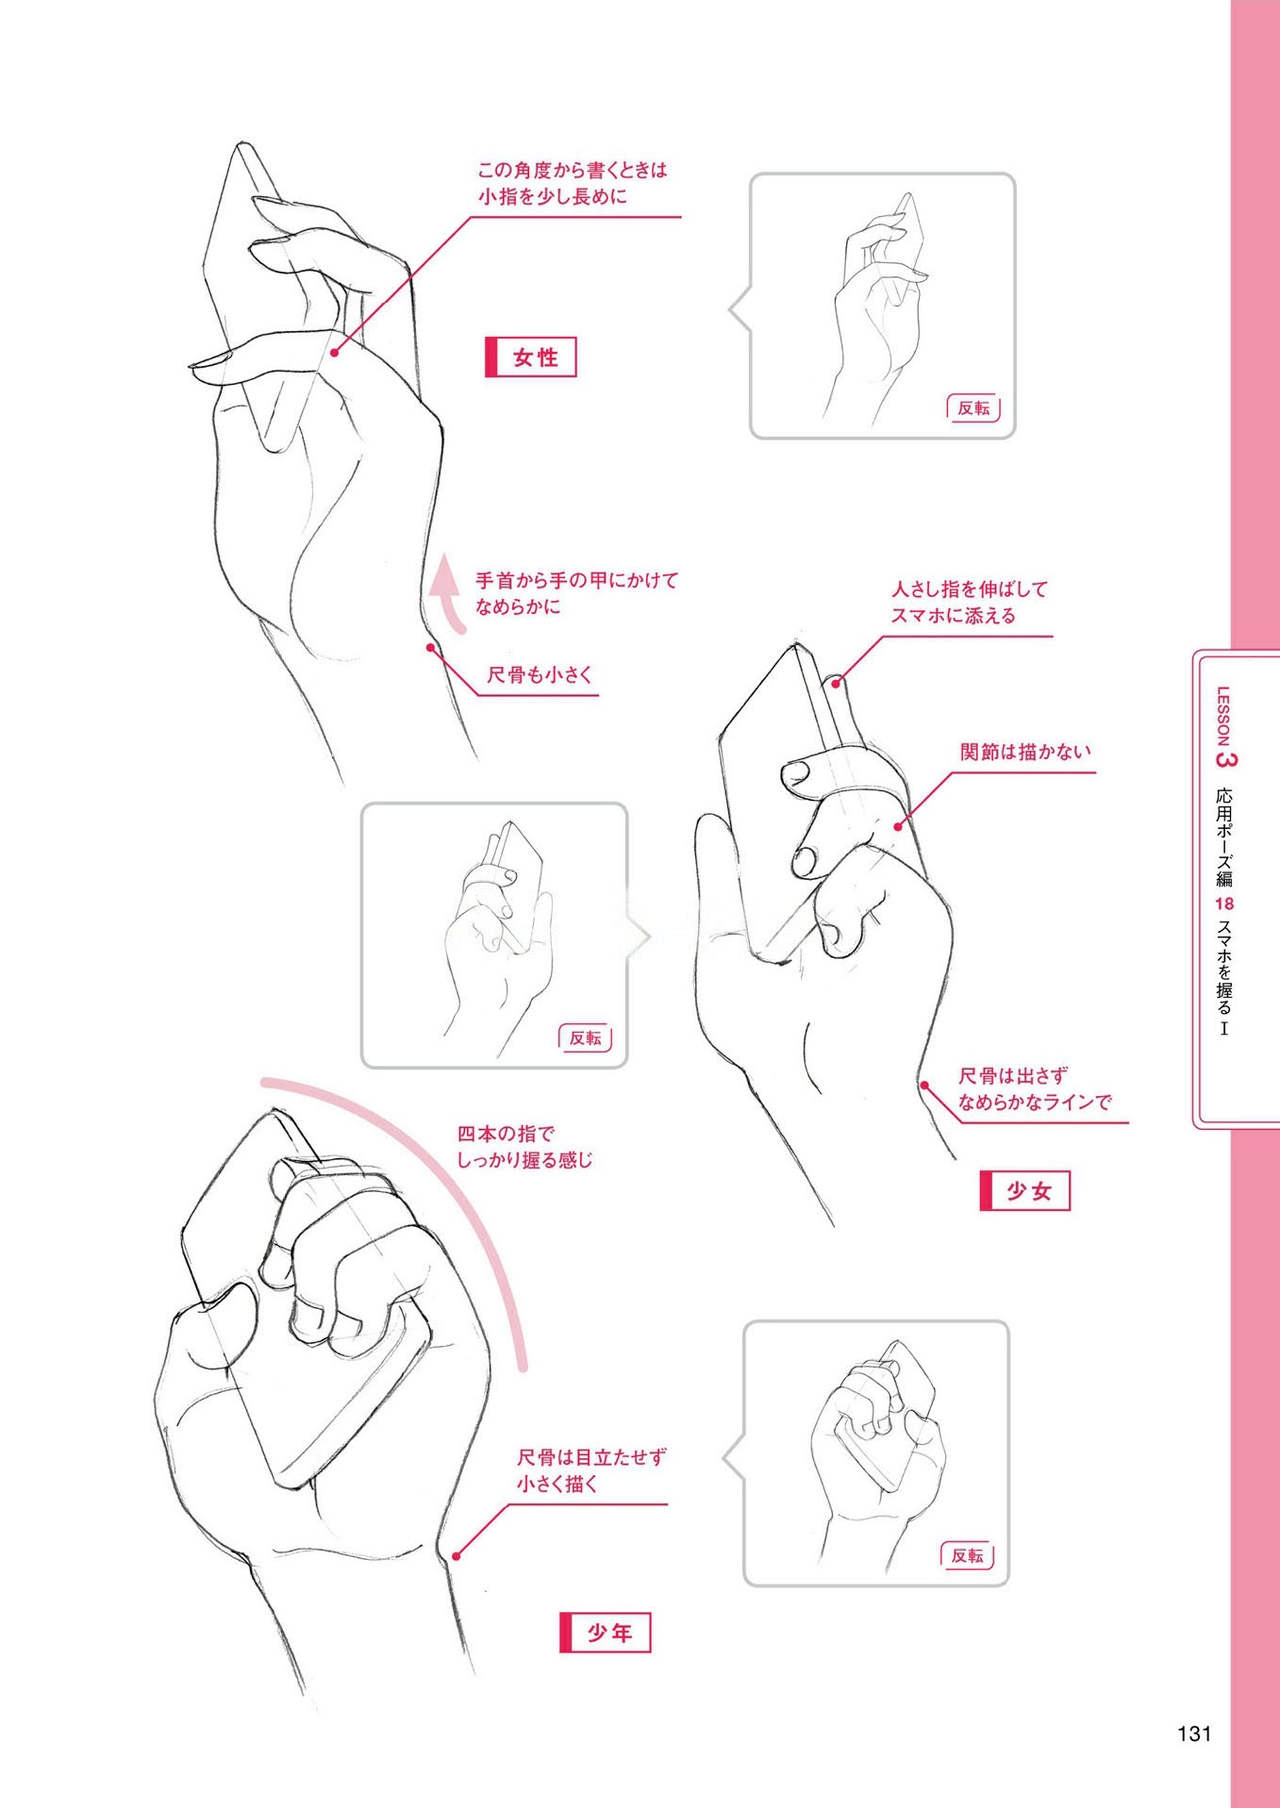 How to draw hands 131